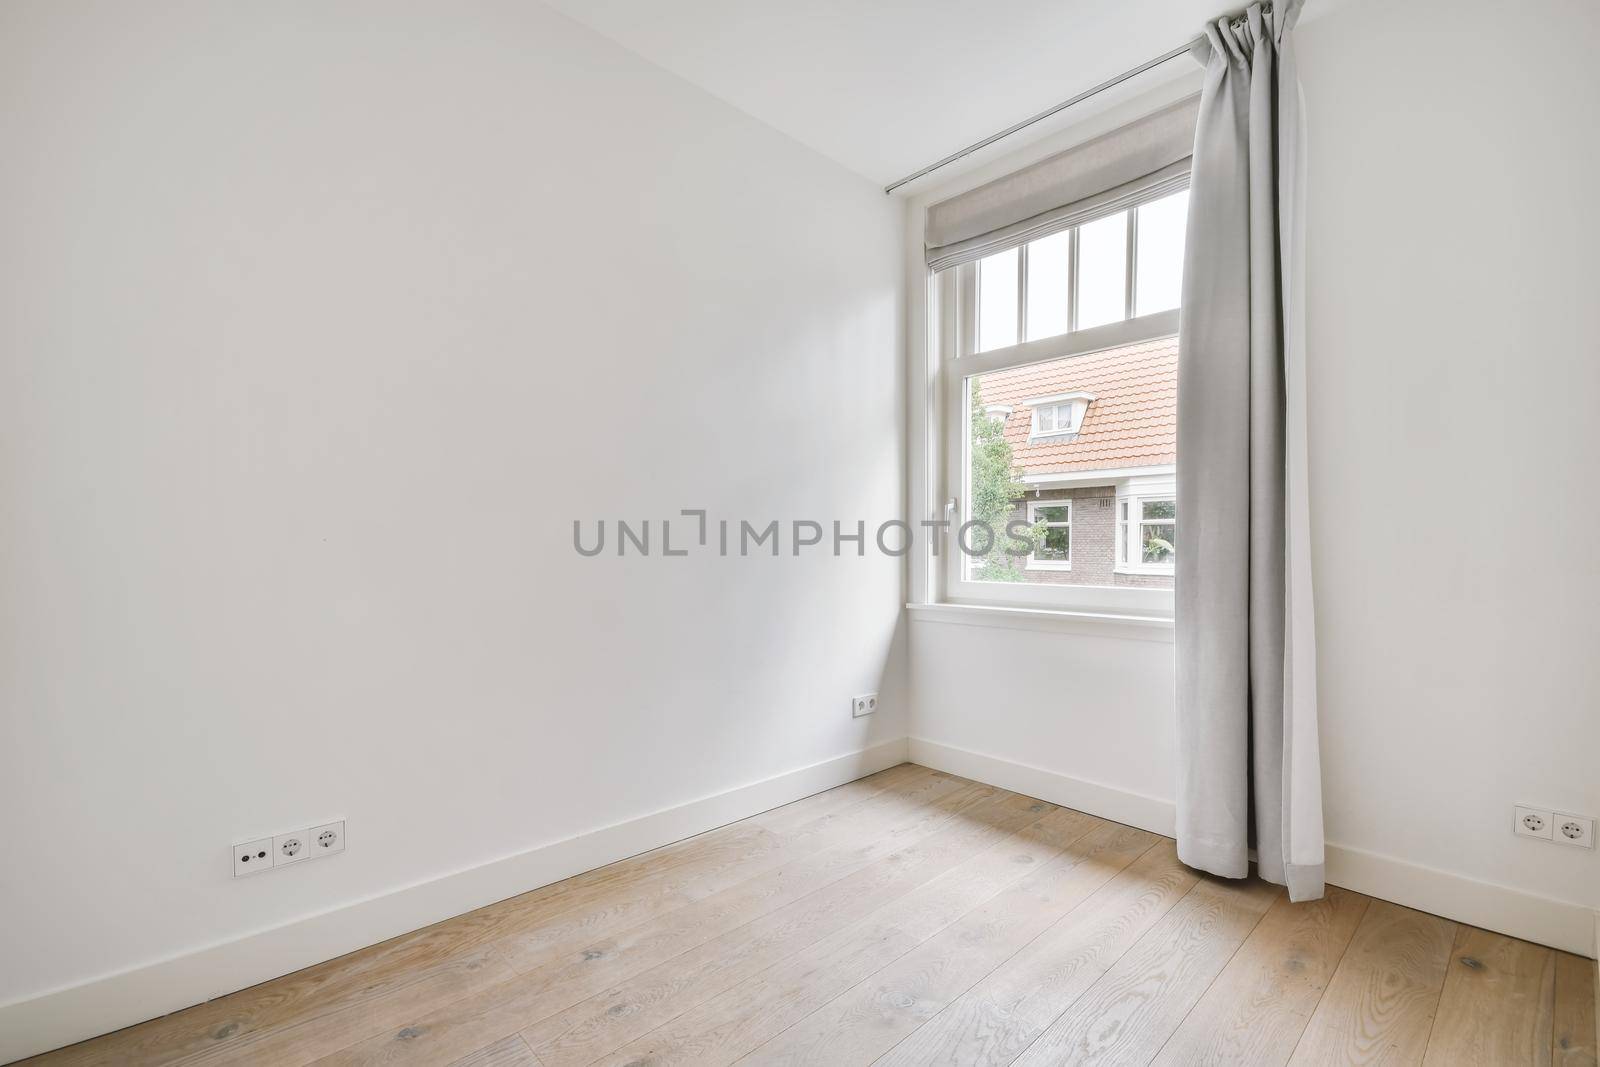 Spacious, bright and beautiful room with large windows and parquet floors